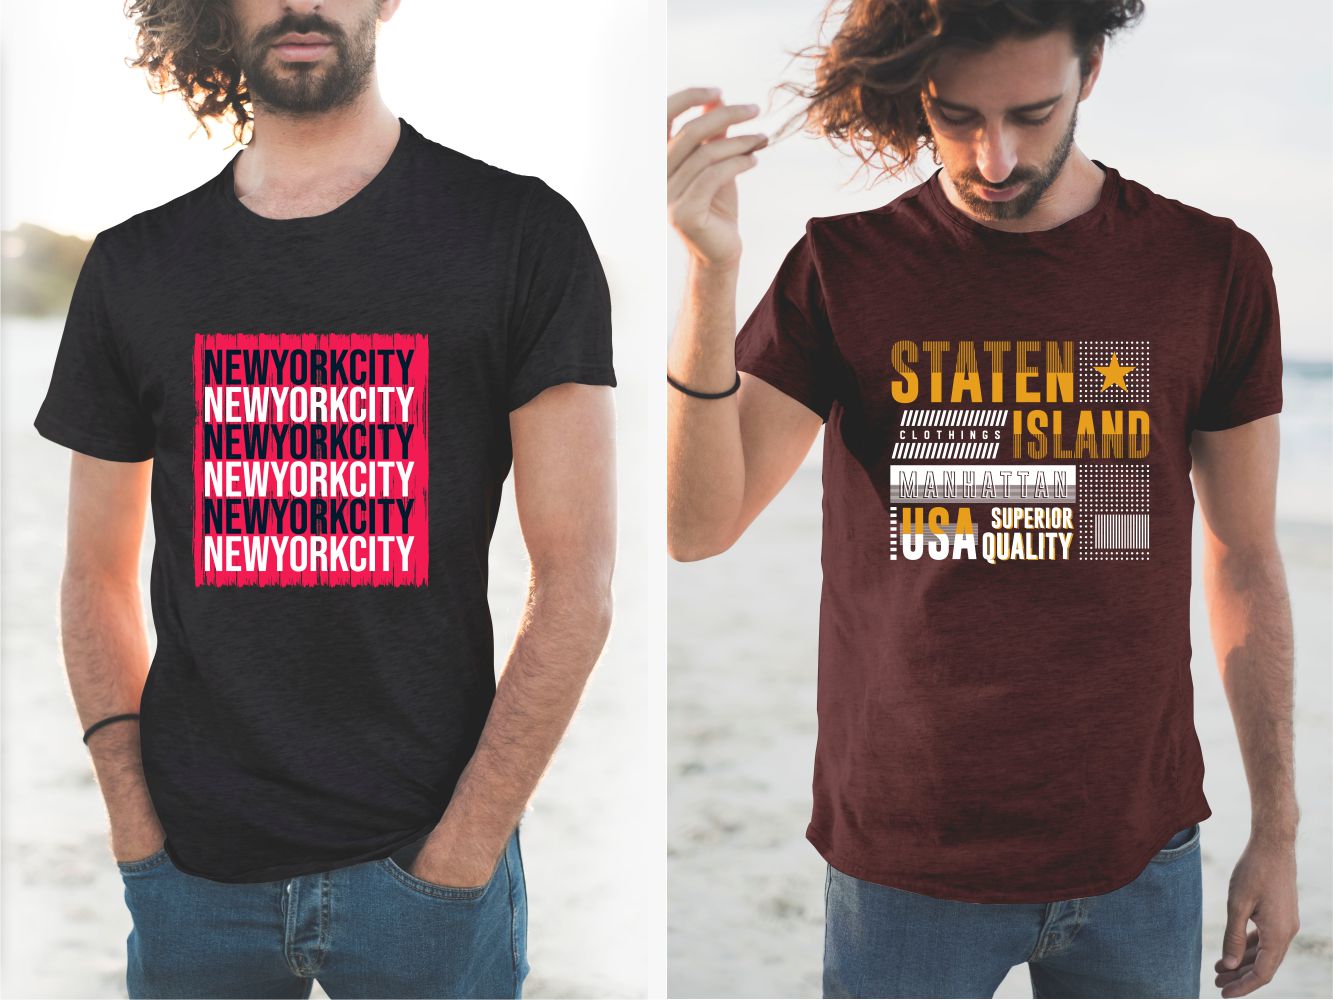 Black and brown T-shirts with picturesque and memorable designs.